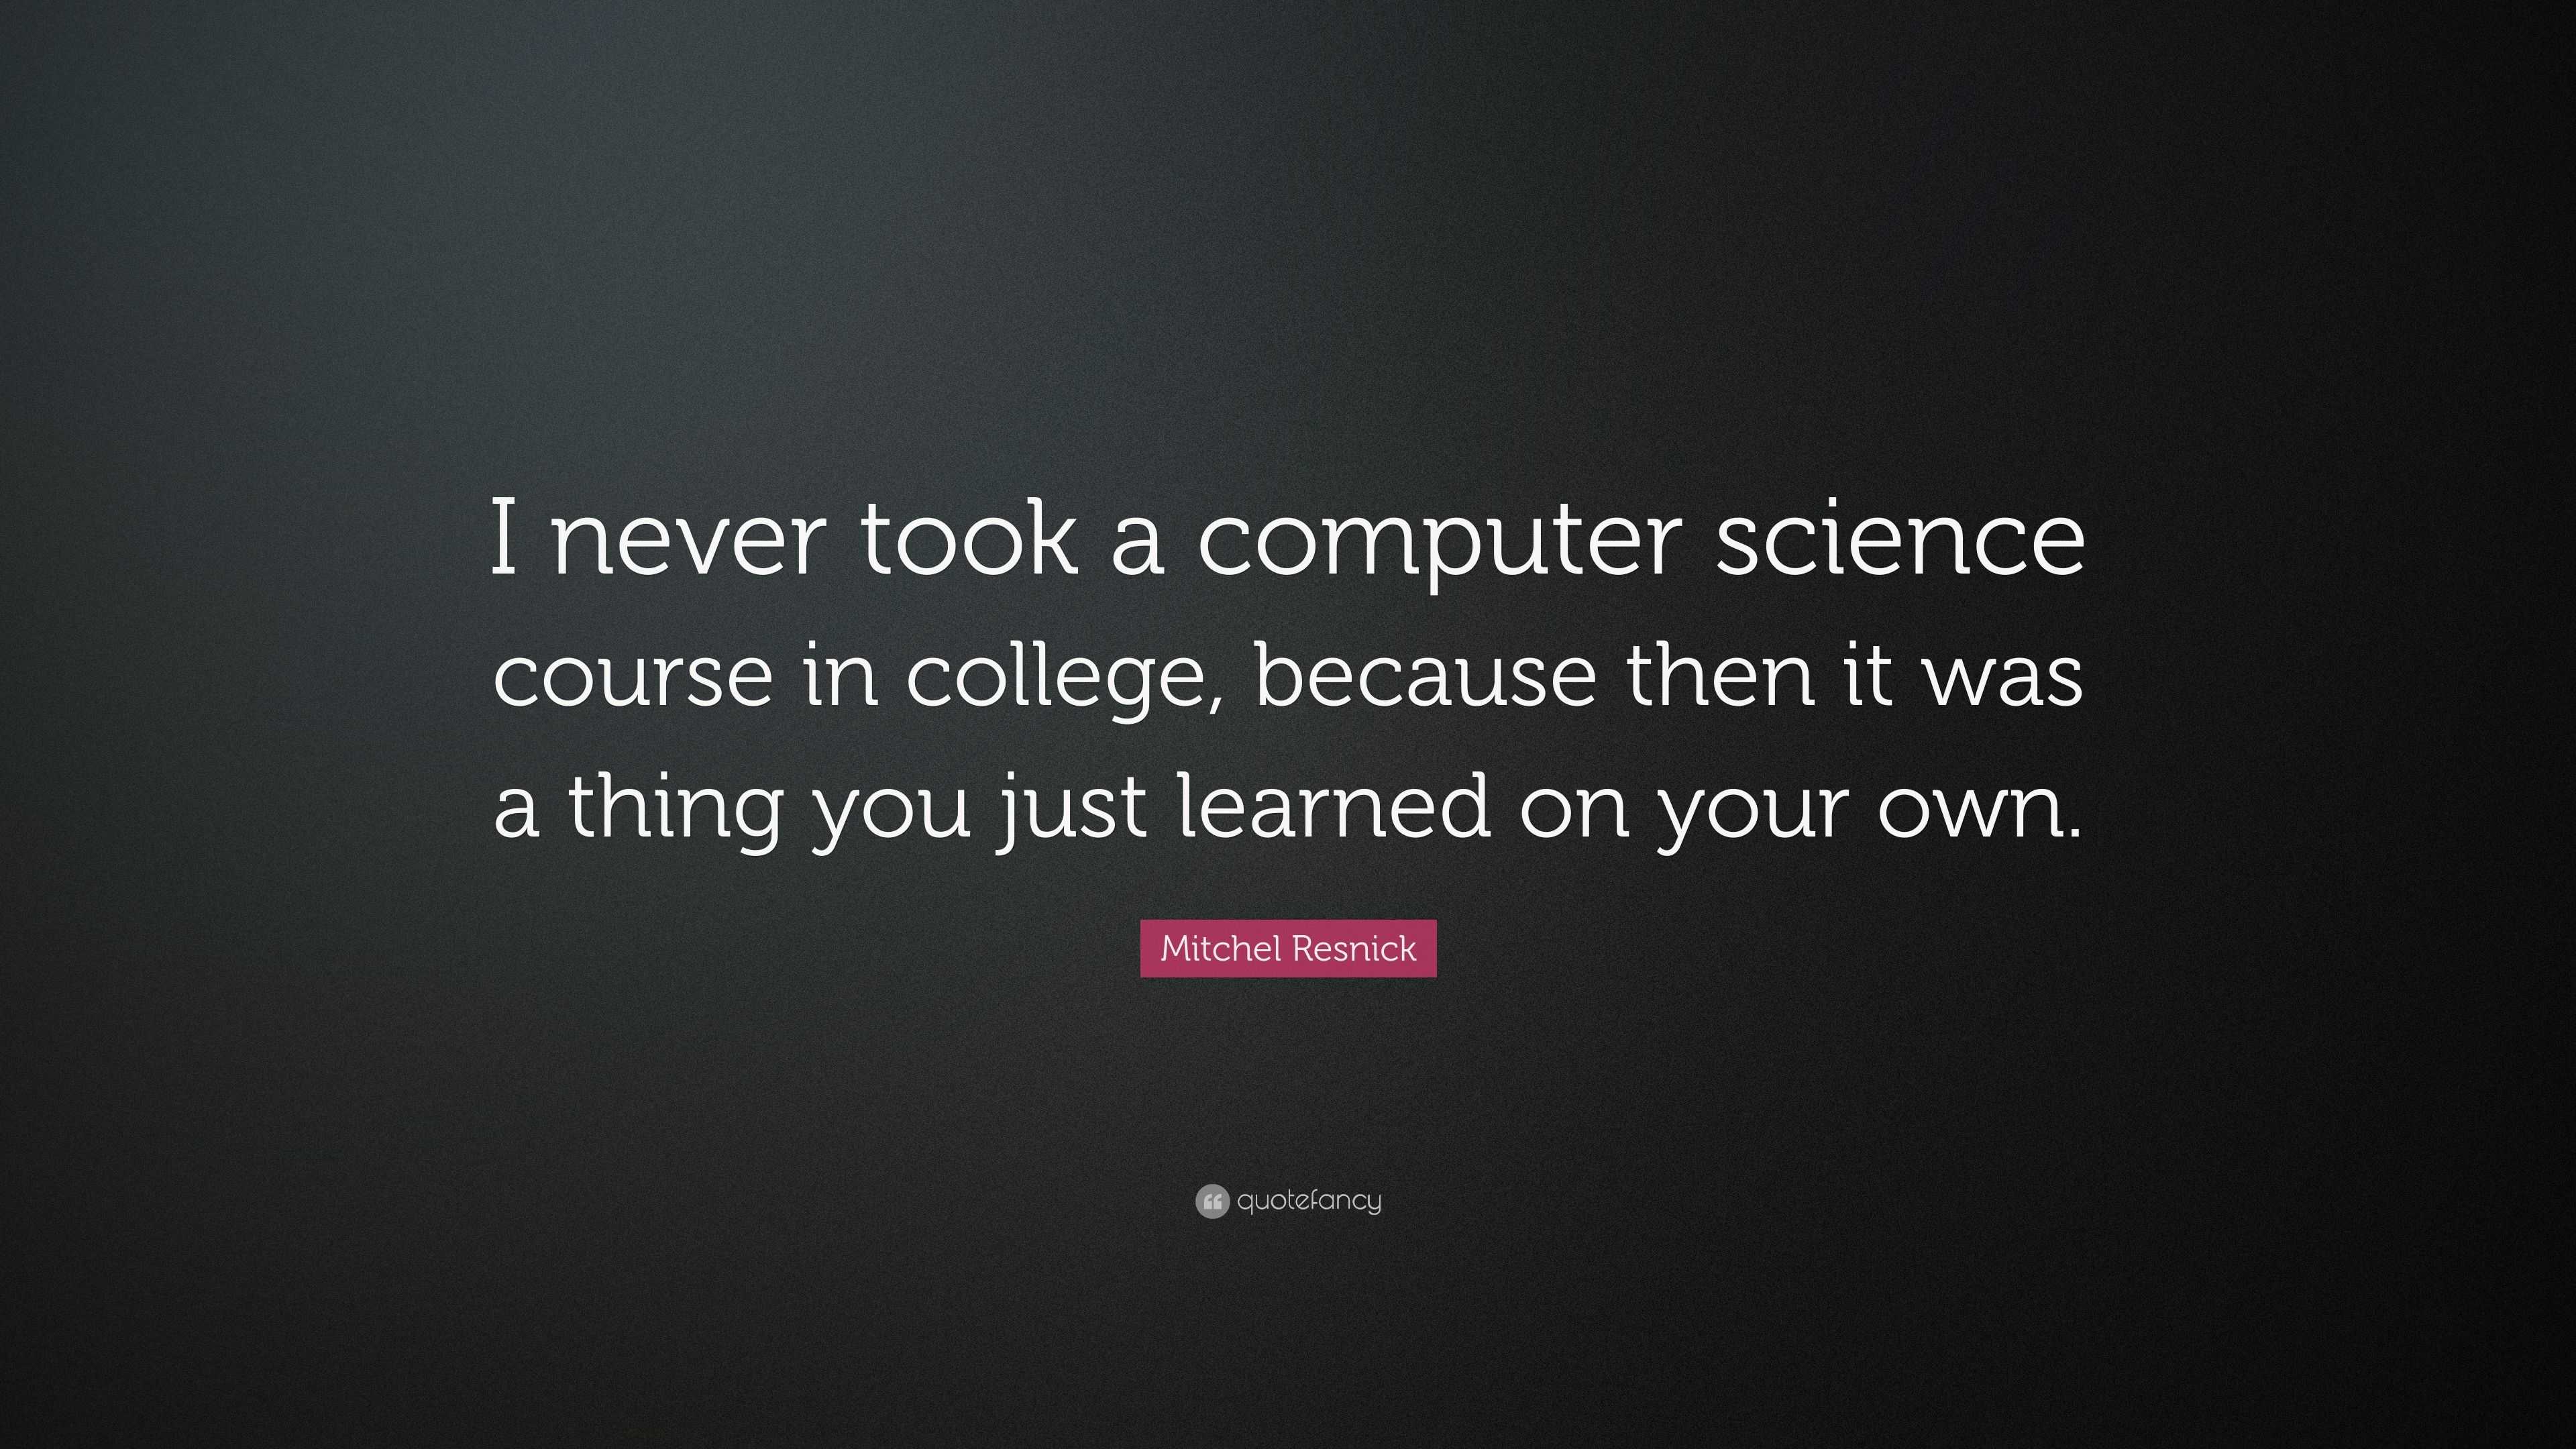 Pin by Miki on Pozadia  Computer science quotes, Coding quotes